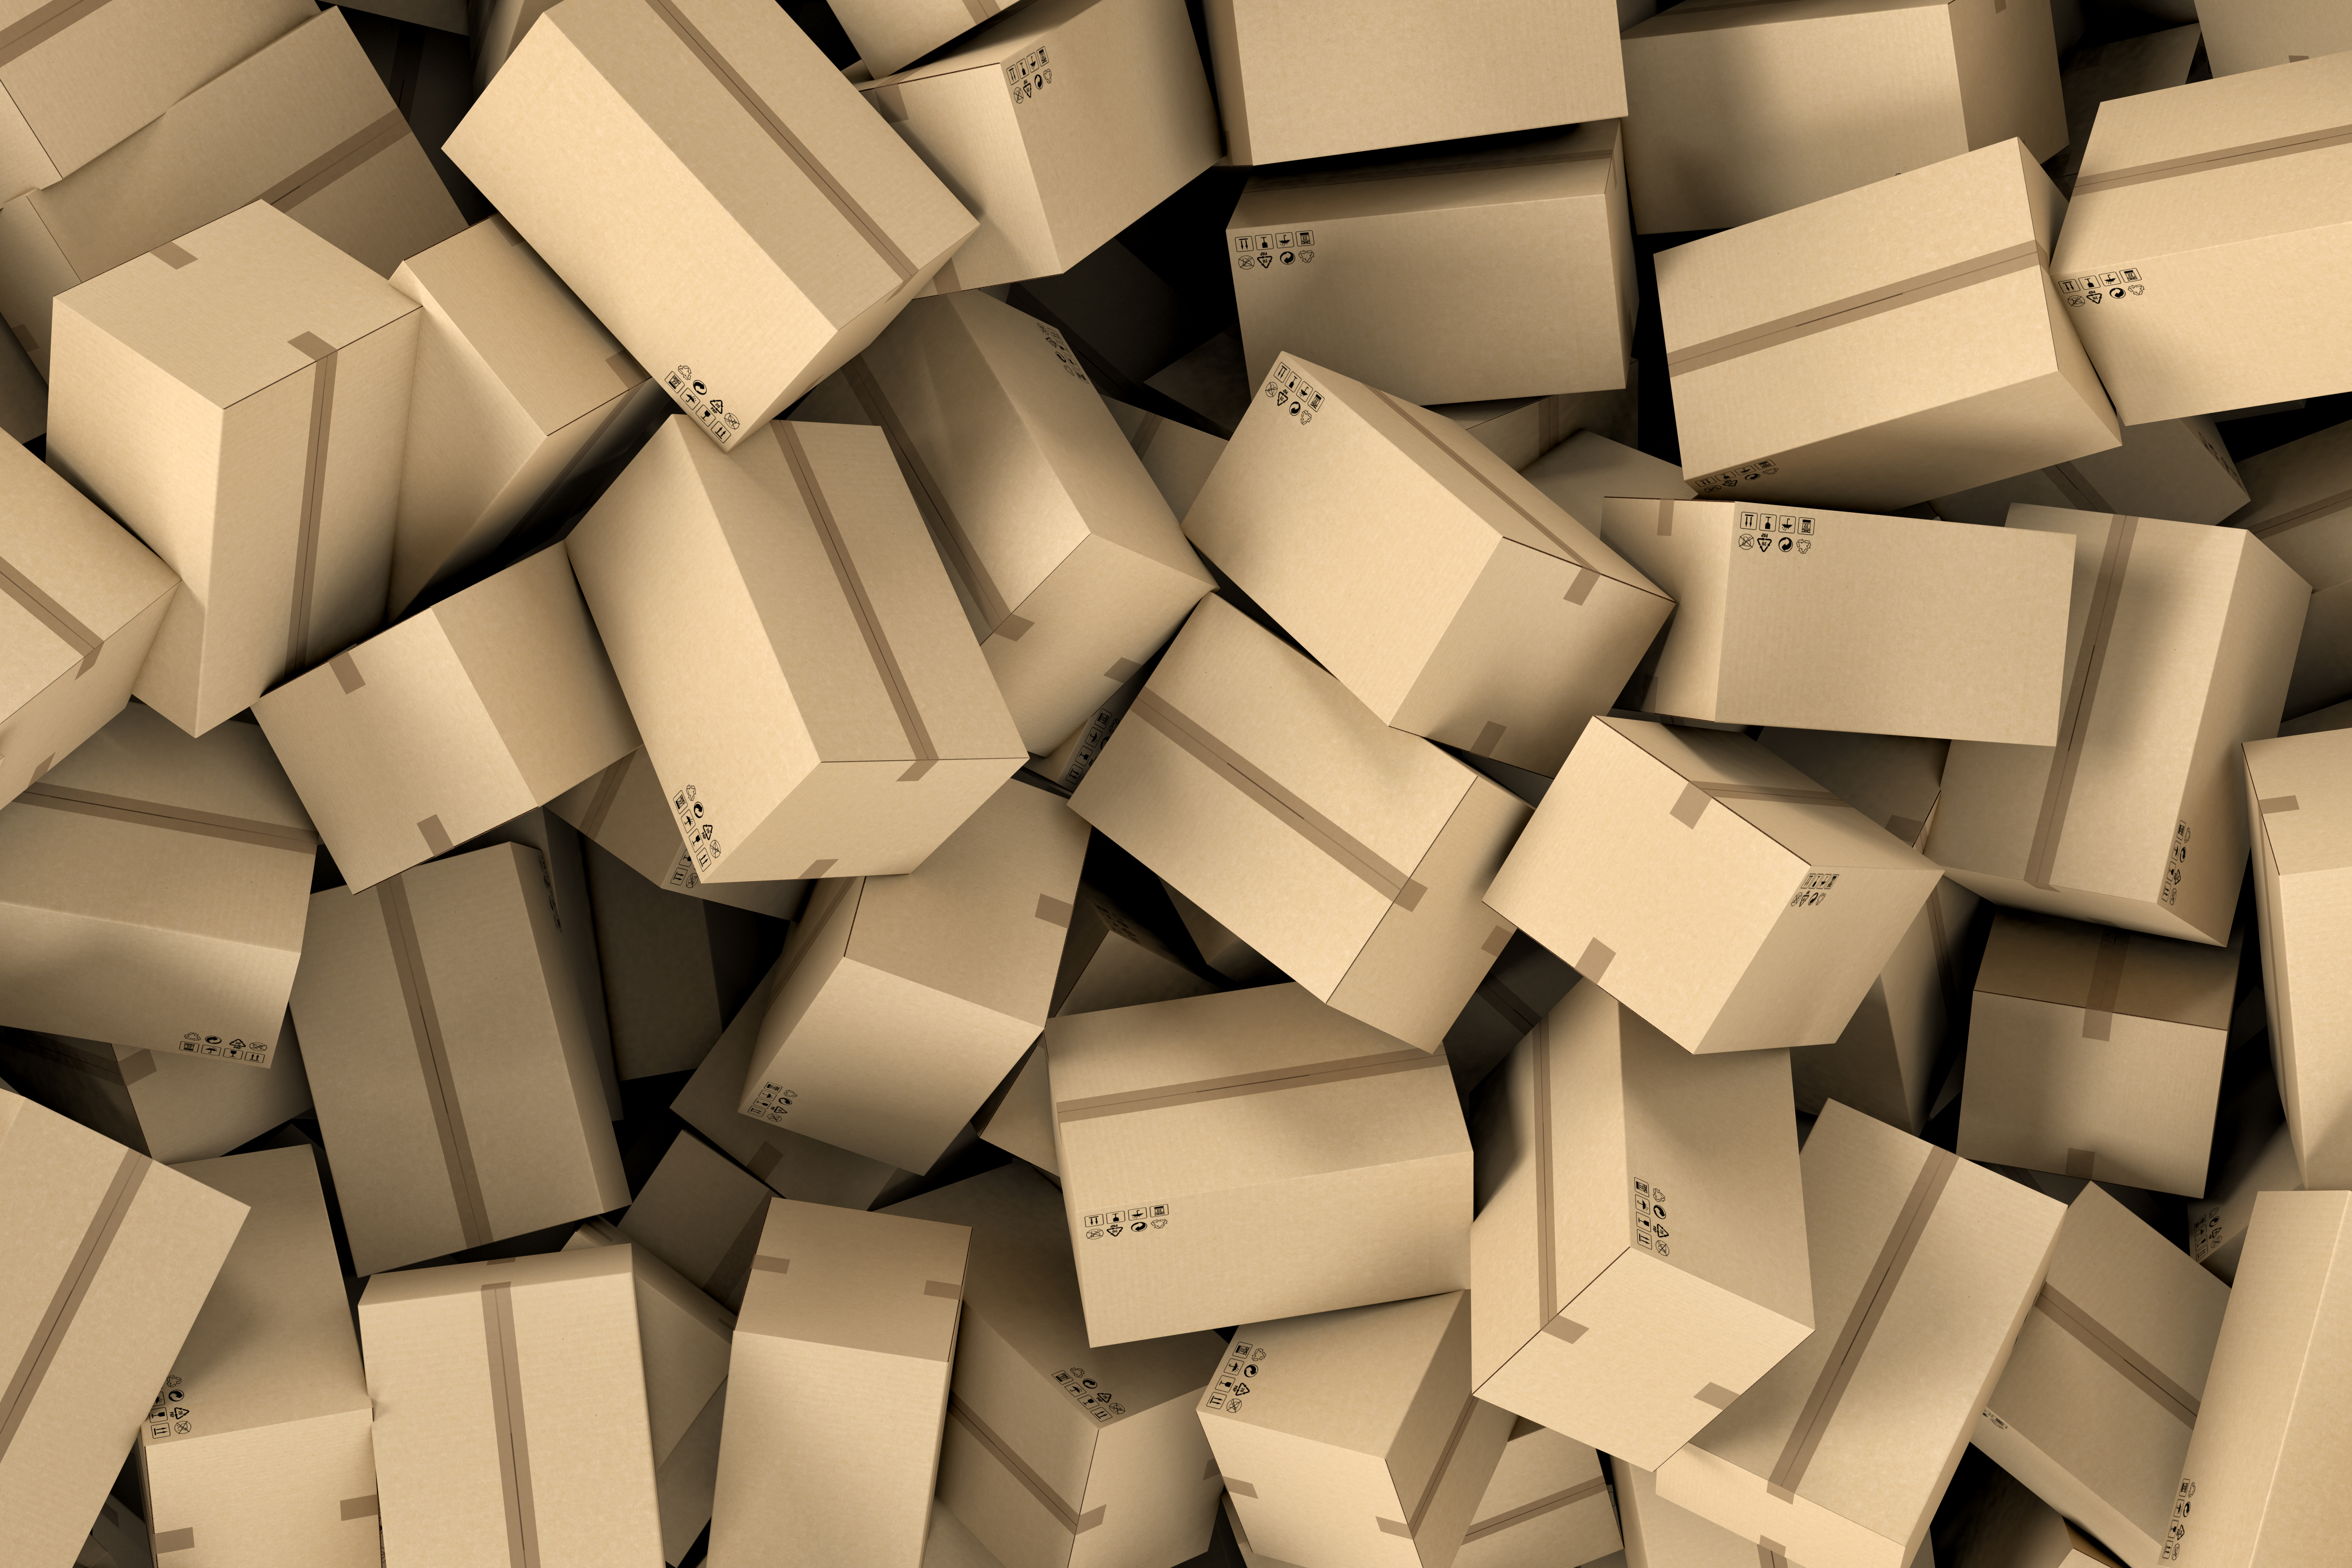 3d rendering of a huge amount of cardboard boxes lying together in disorder, top view. Postal services. Packing and crating. Storage of products. Compartments for packages.